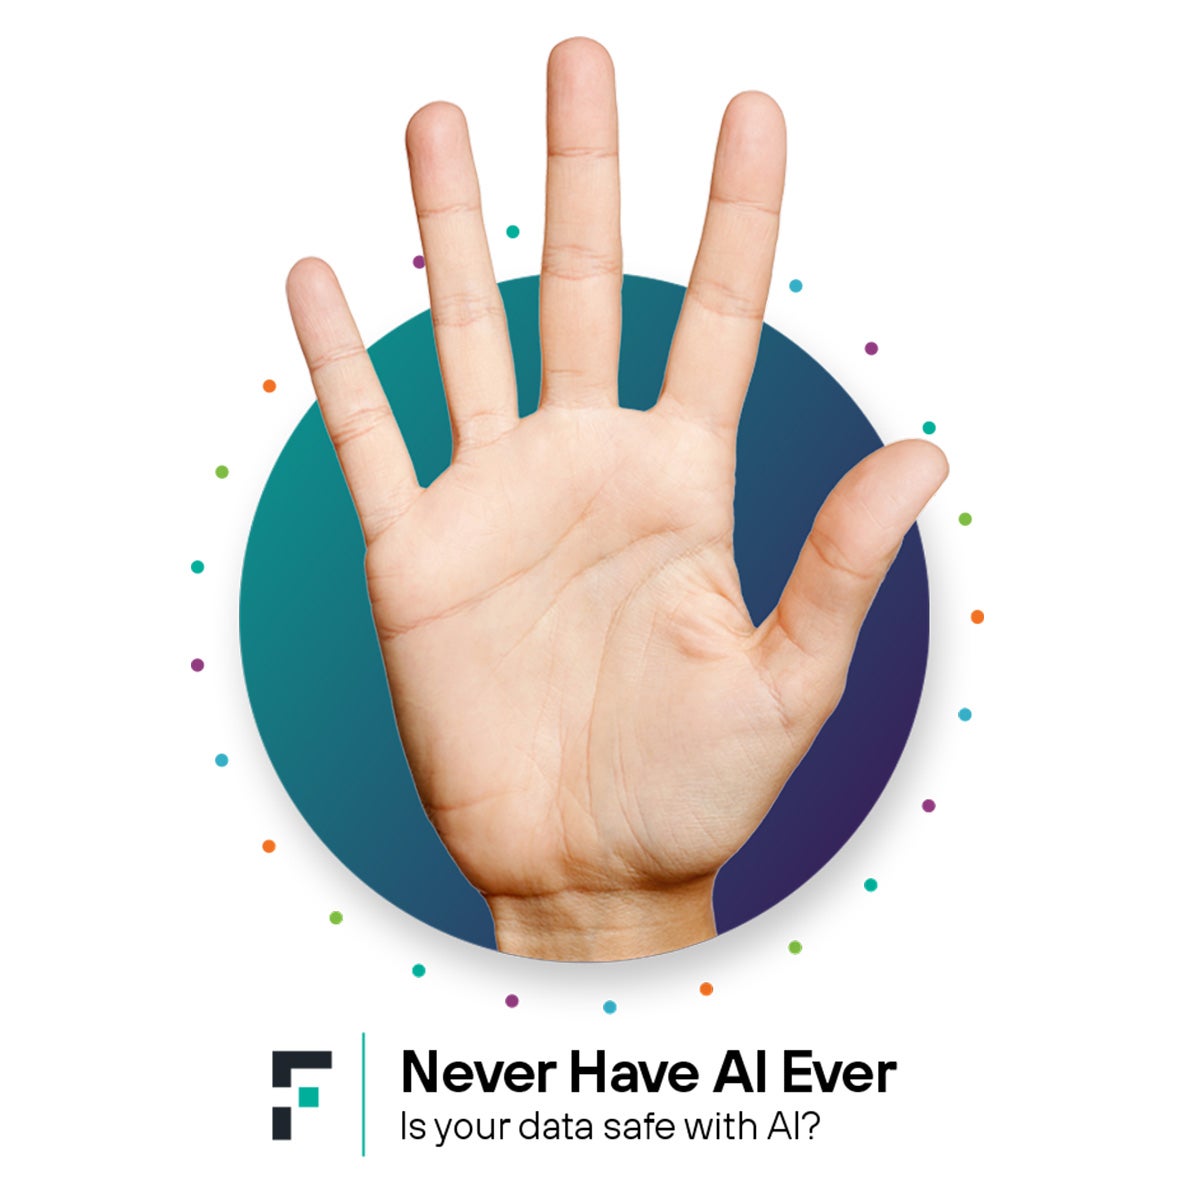 Take Forcepoint's 'Never Have AI Ever' quiz